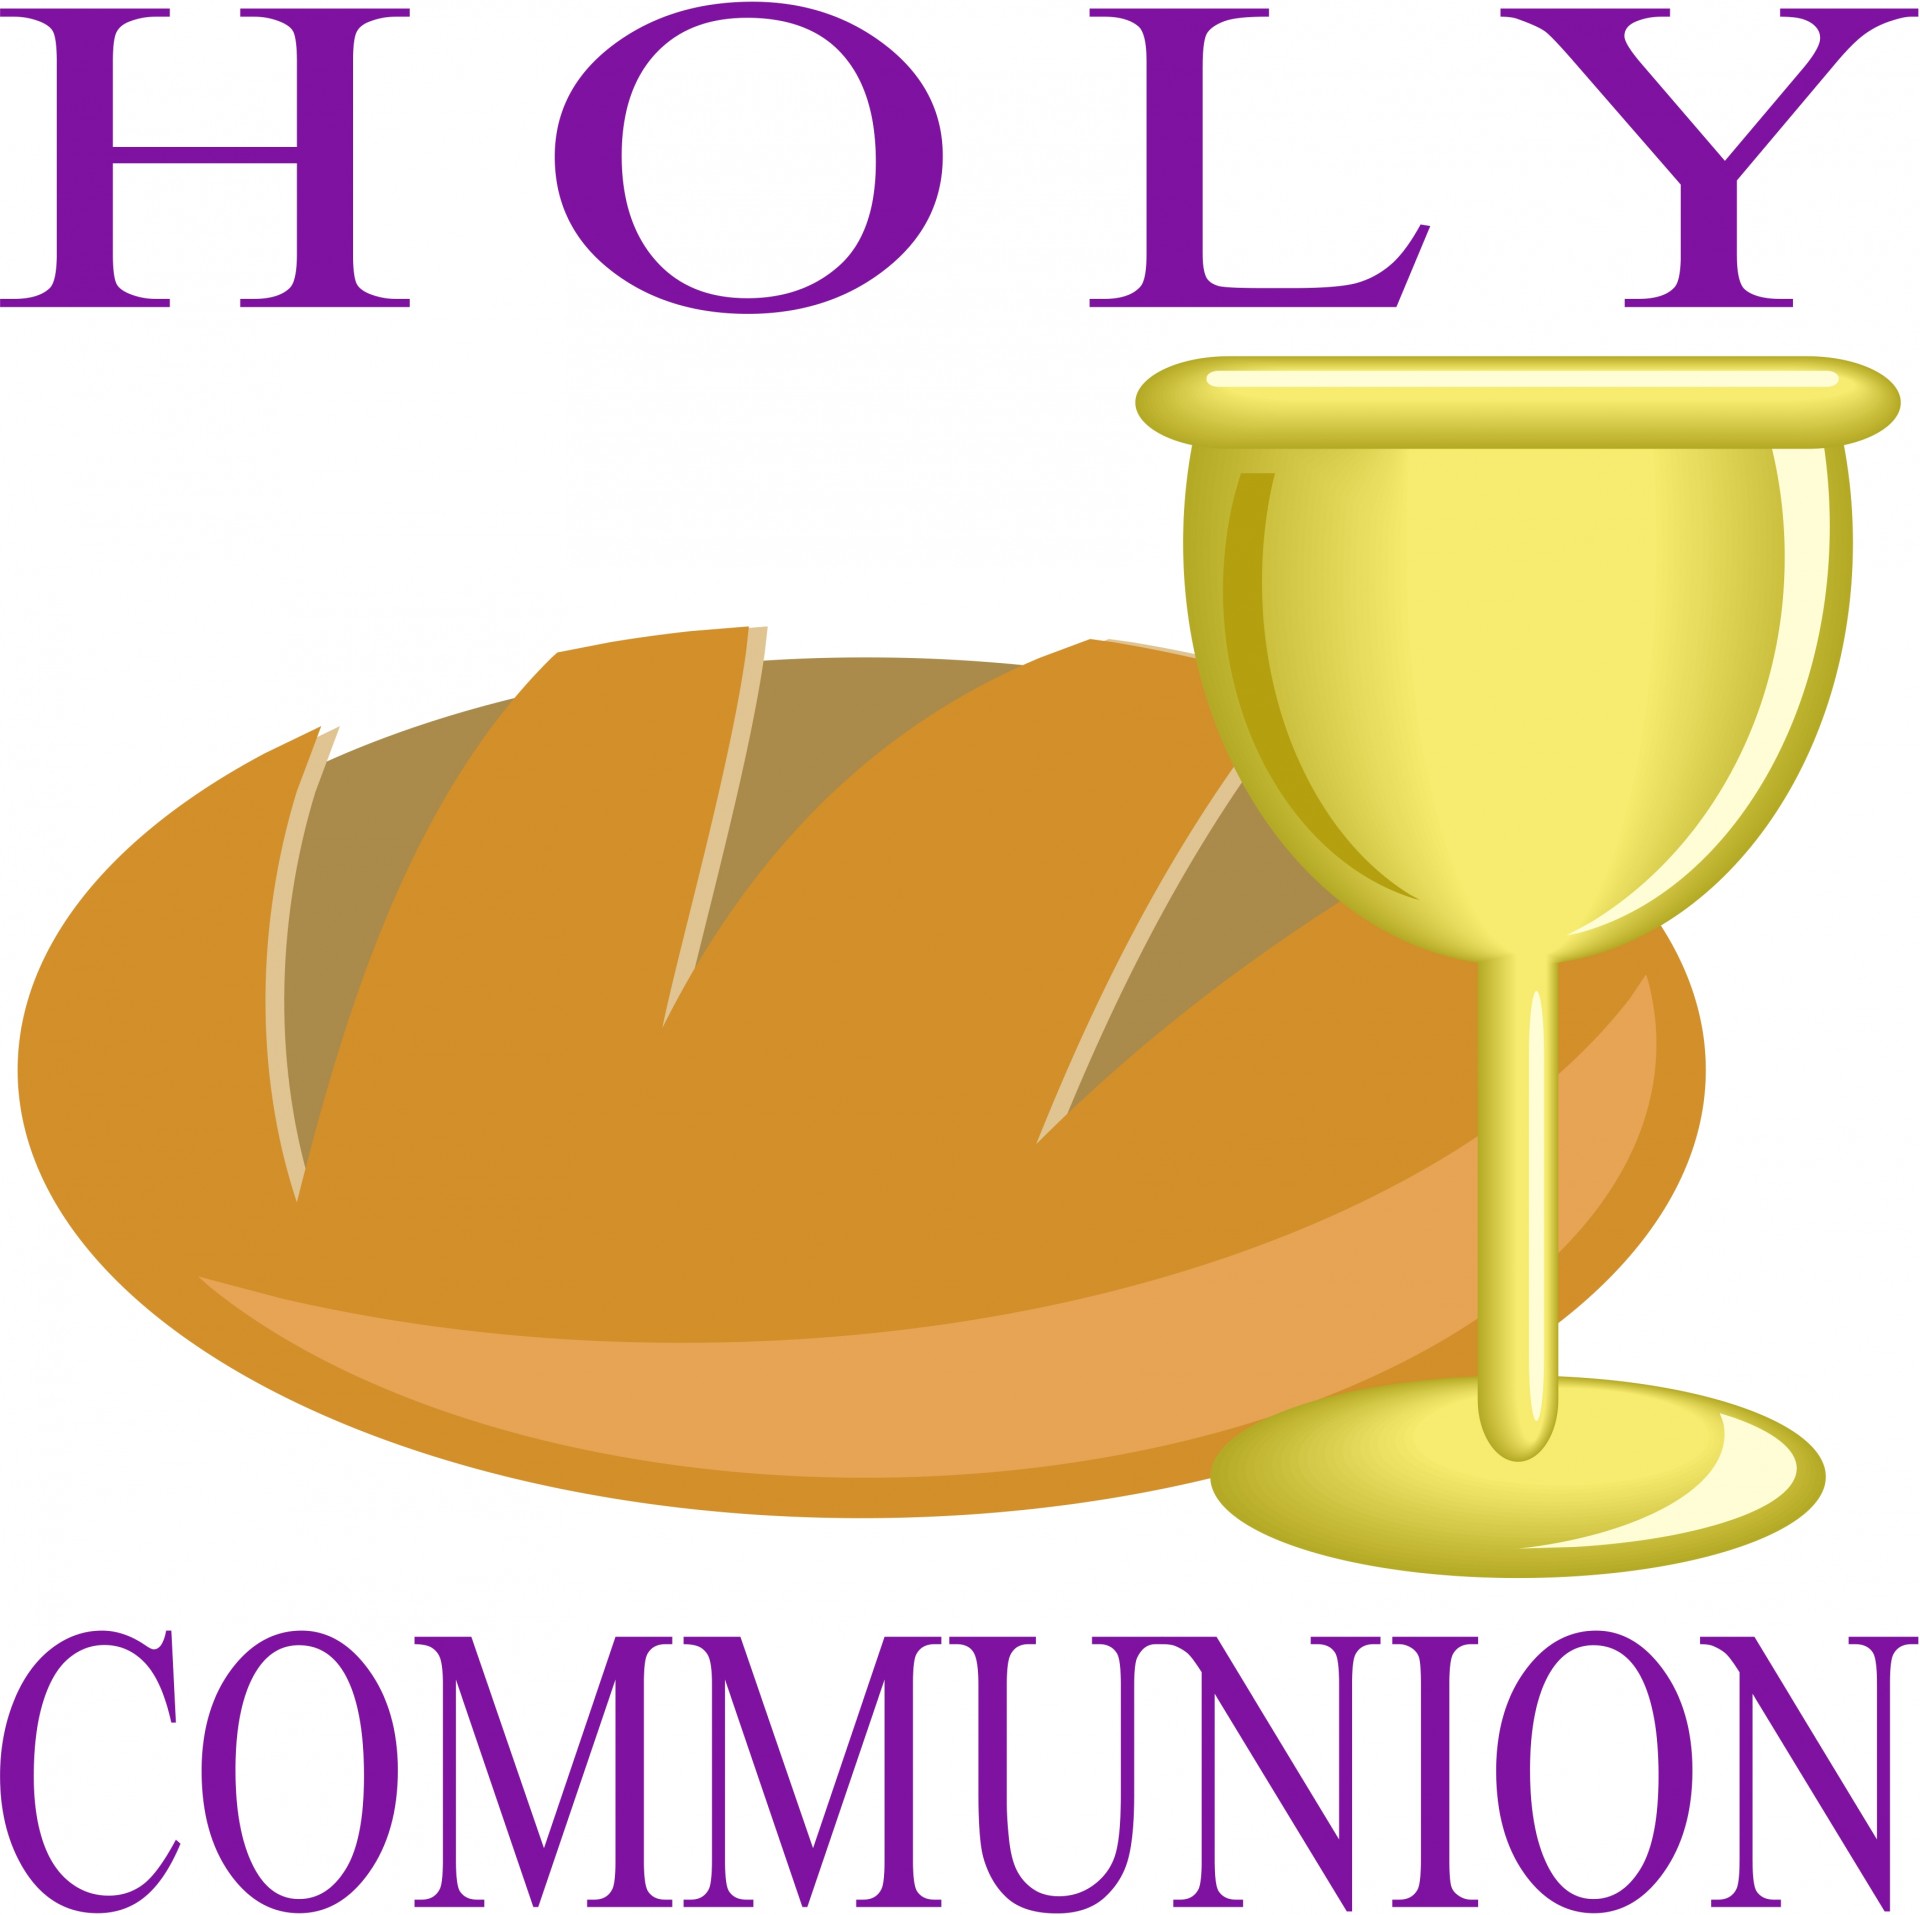 Related This First Communion 